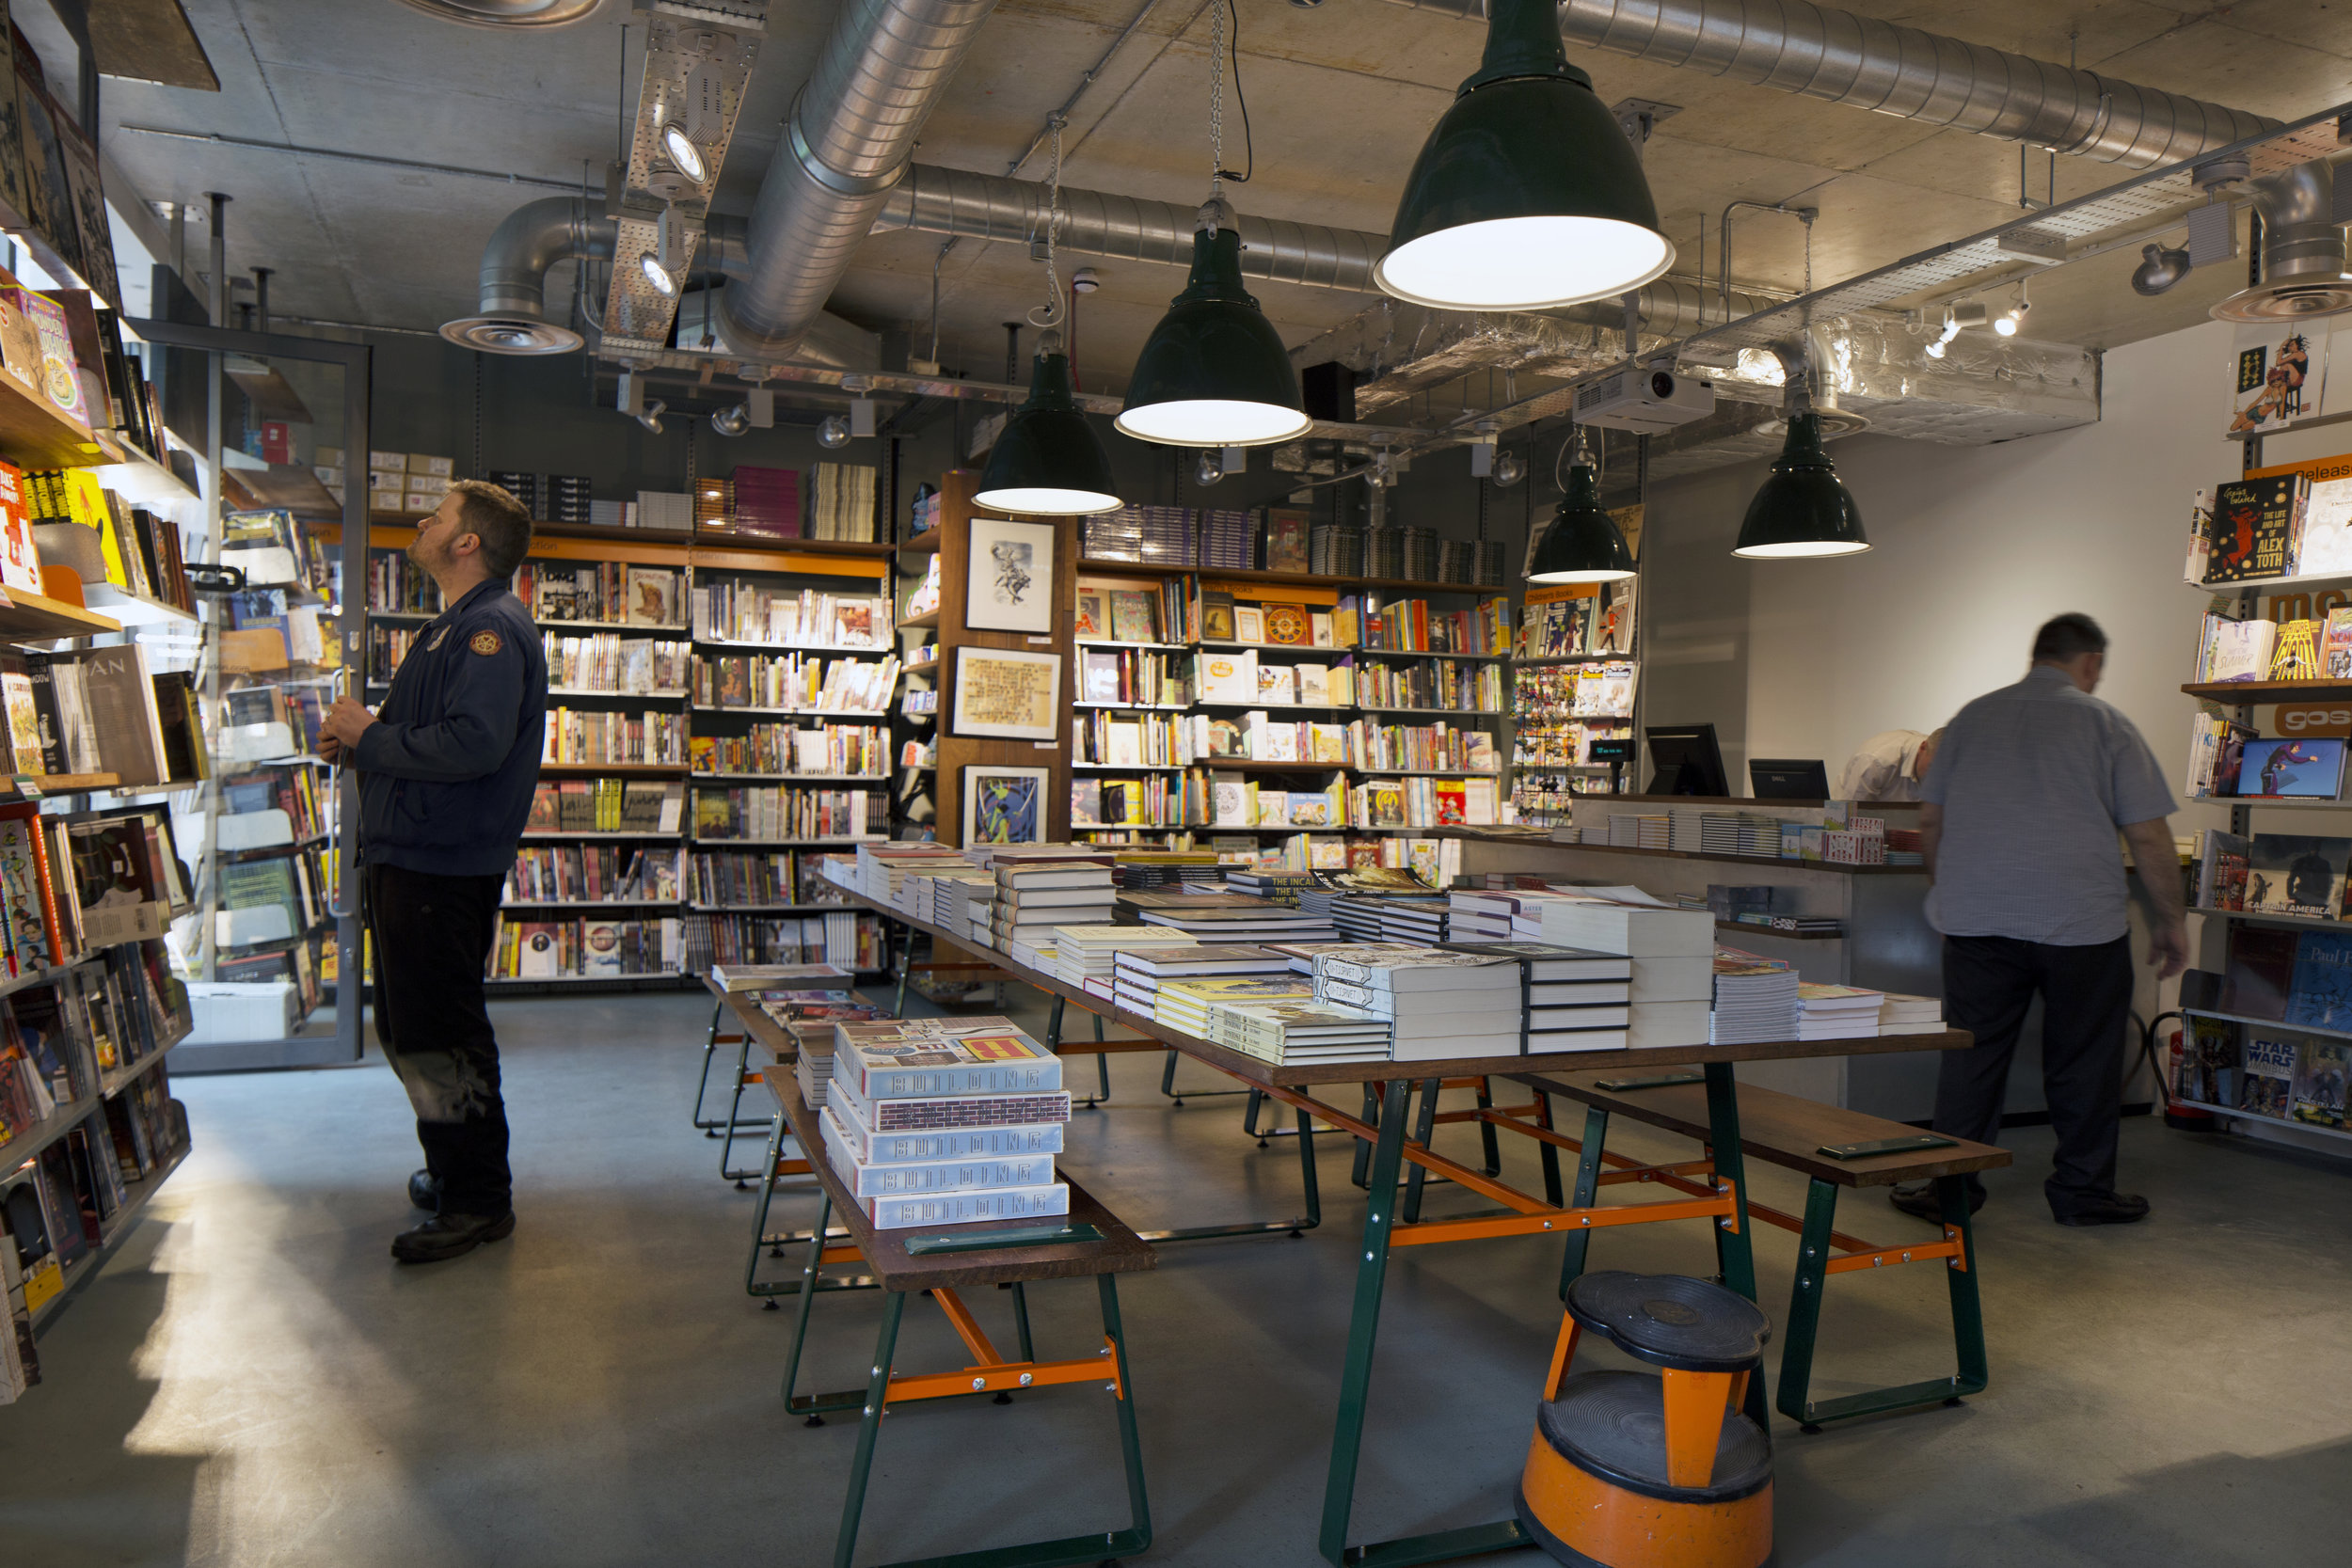  Gosh!  1 Berwick St  Gosh! Comics is an extremely well regarded and swanky comic bookshop in Soho. With 25 year of experience and knowledgeable staff, their range of graphic novels is second to none. From “translated European albums to mainstream su